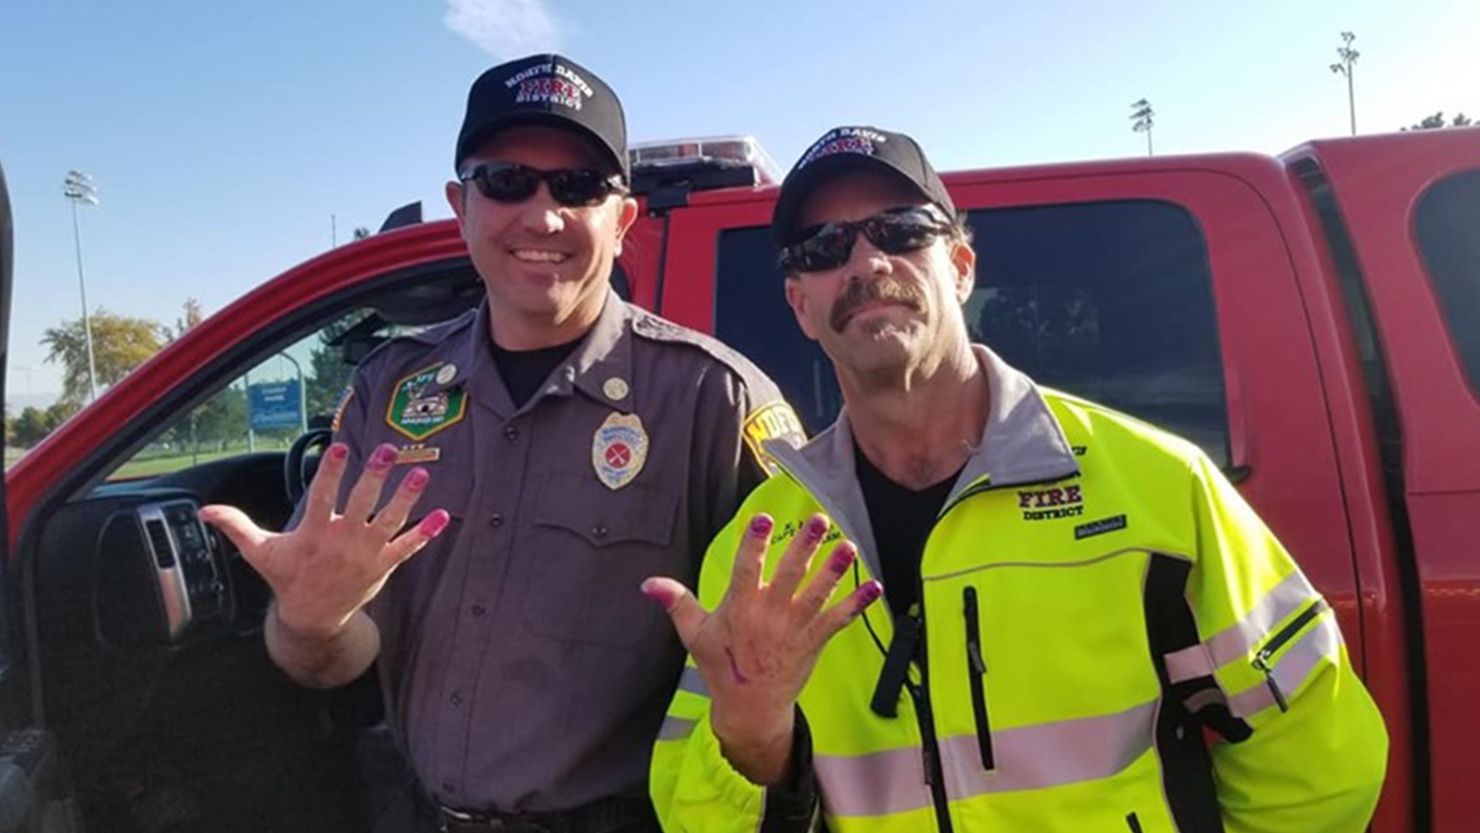 Battalion Chief Allen Hadley and Capt. Kevin Lloyd with the North Davis Fire District show off their purple manicures after they helped calm a young girl.